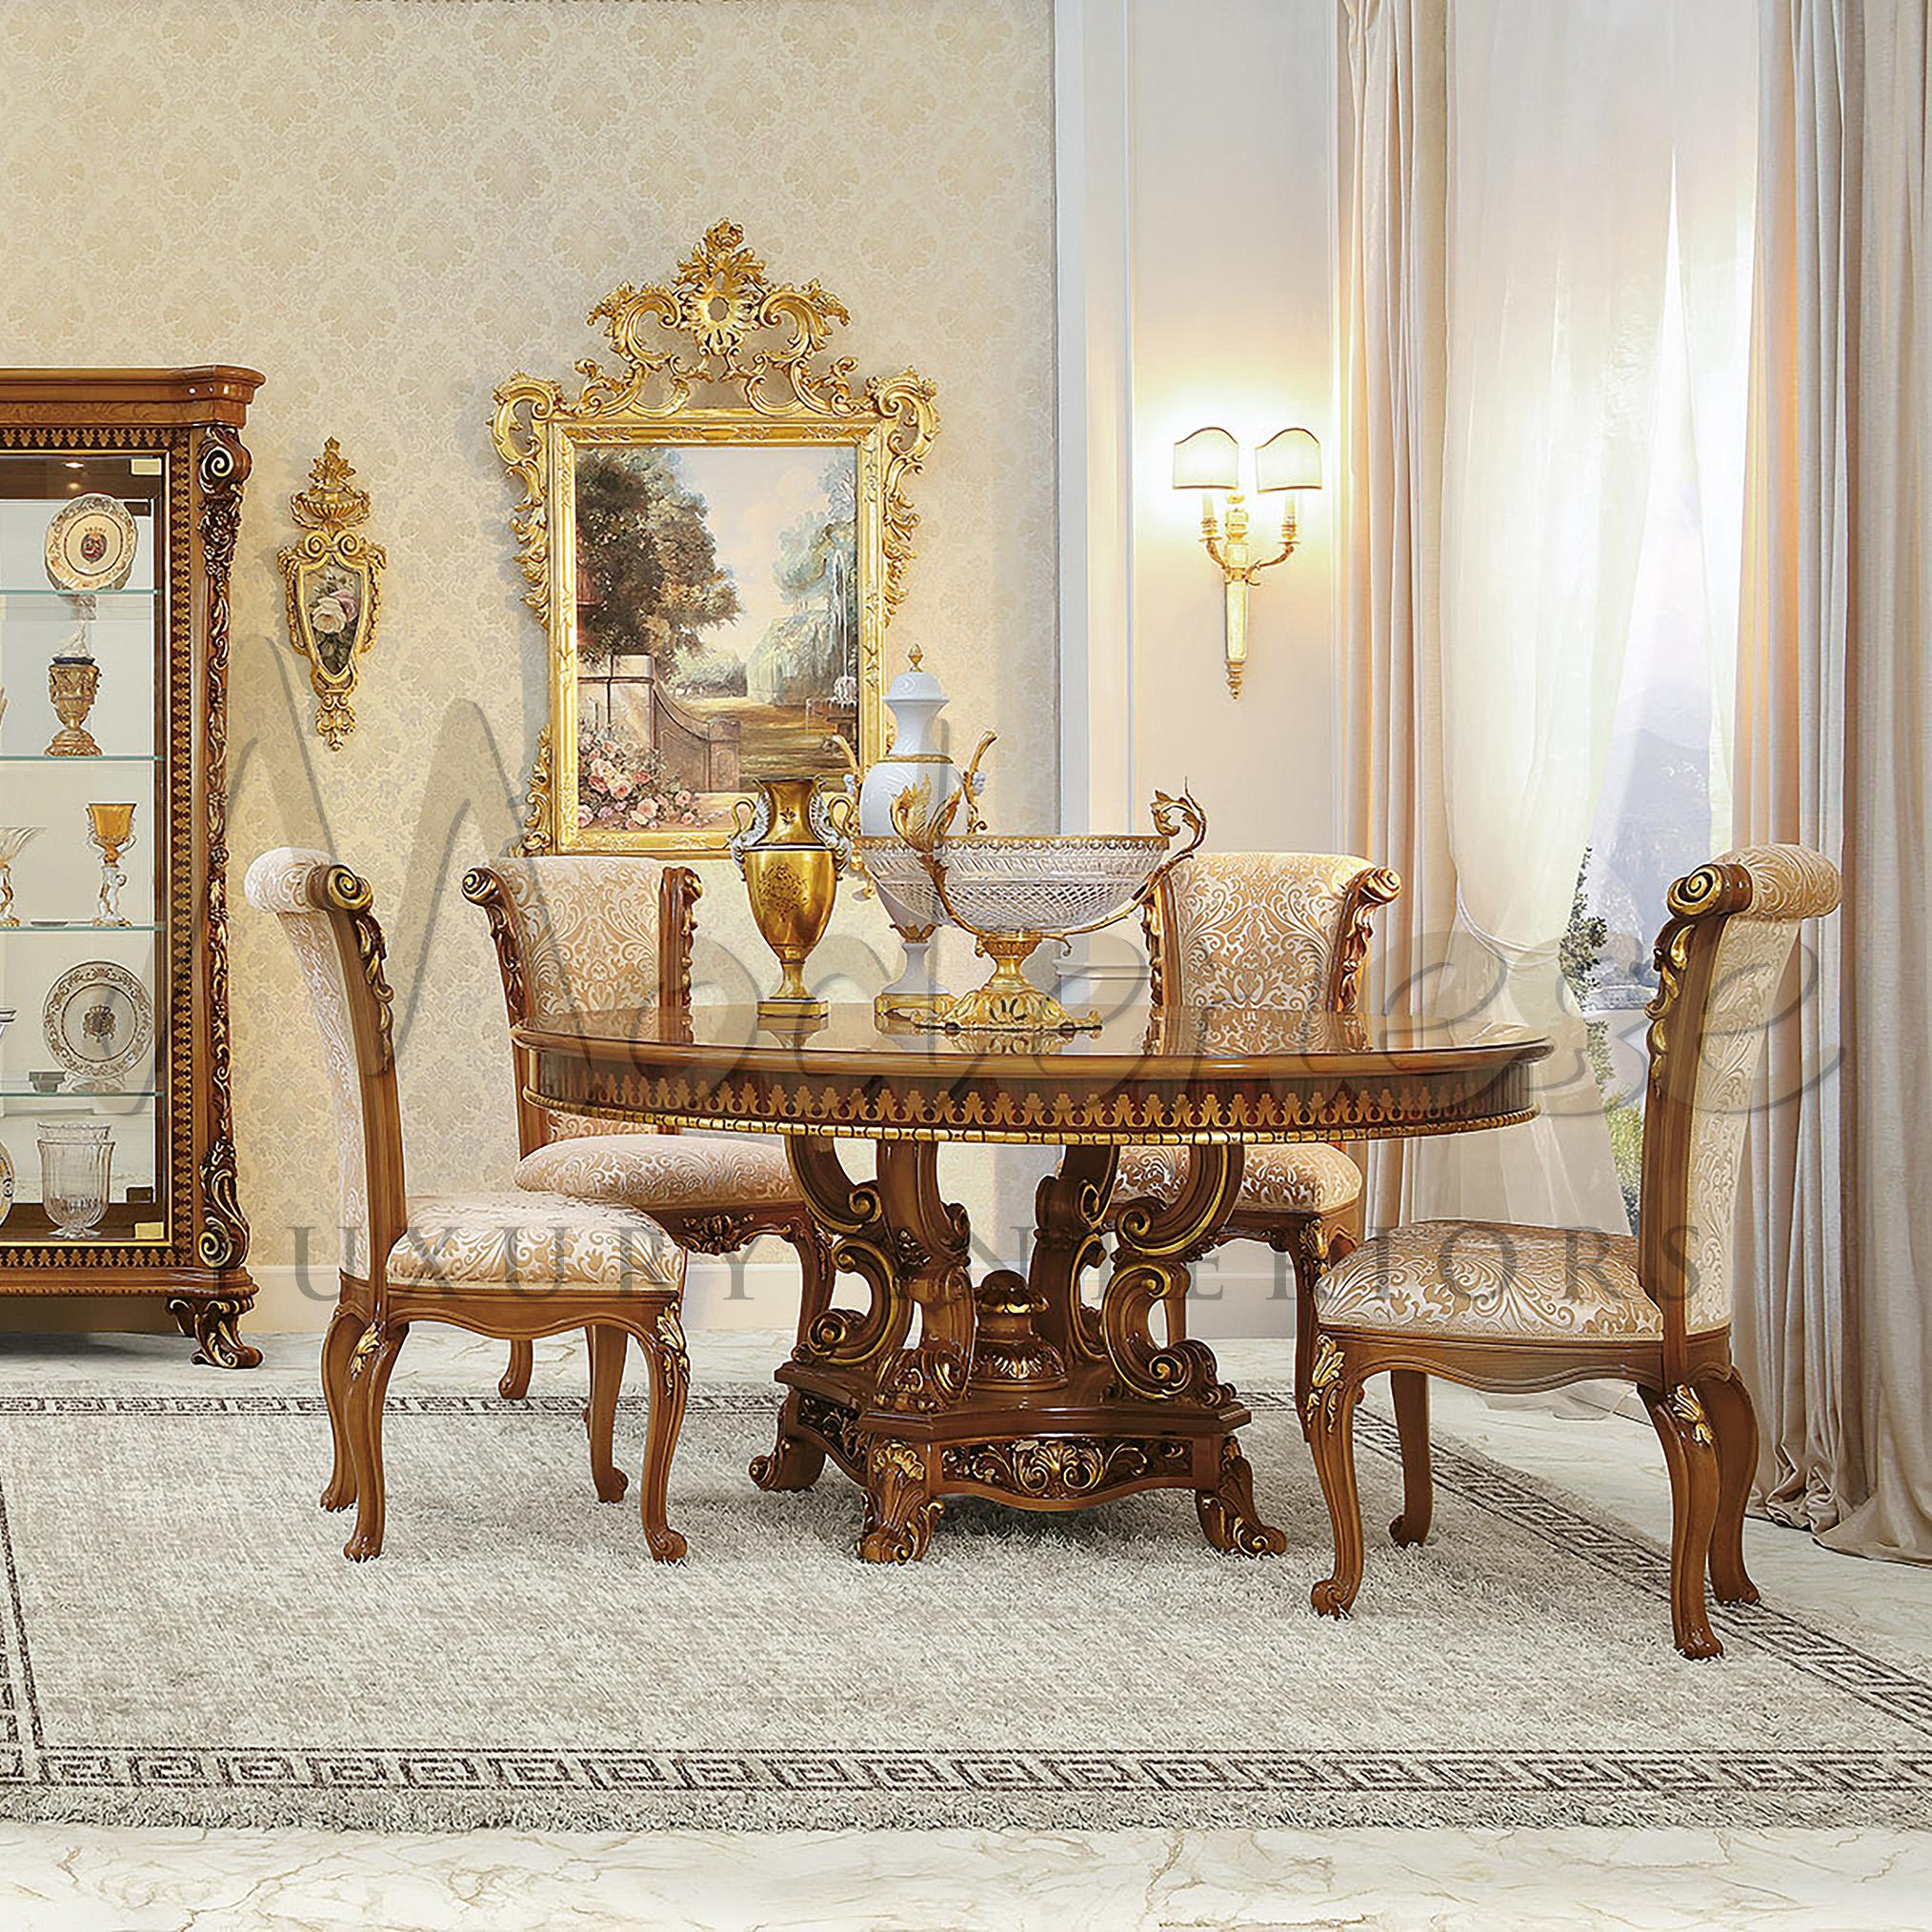 This elegance handcrafted table presents a sophisticated mix of wooden elements on the classic marquetry table top, down to the flemish scroll legs. The sophisticated wood carving legs are the wonder of design and craft work. A true unique piece